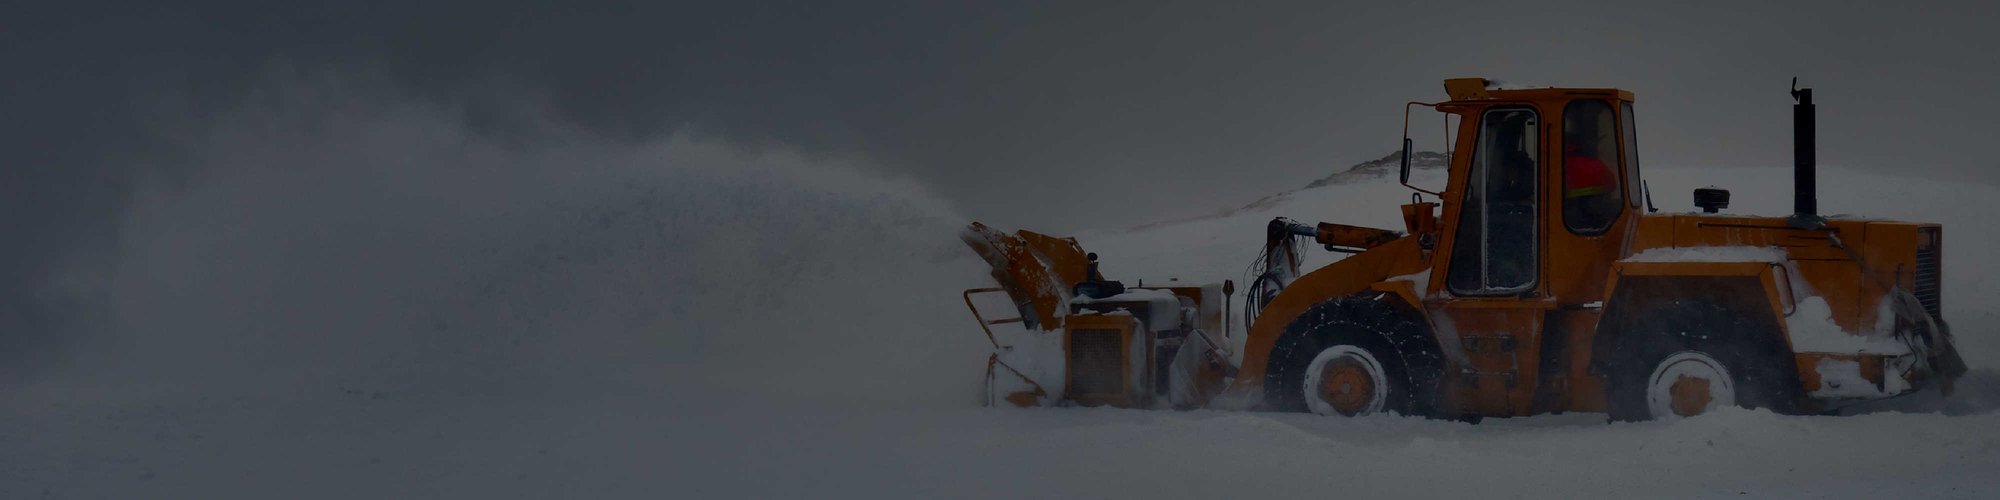 A tractor with a snow plow attachment clearing snow on a hill